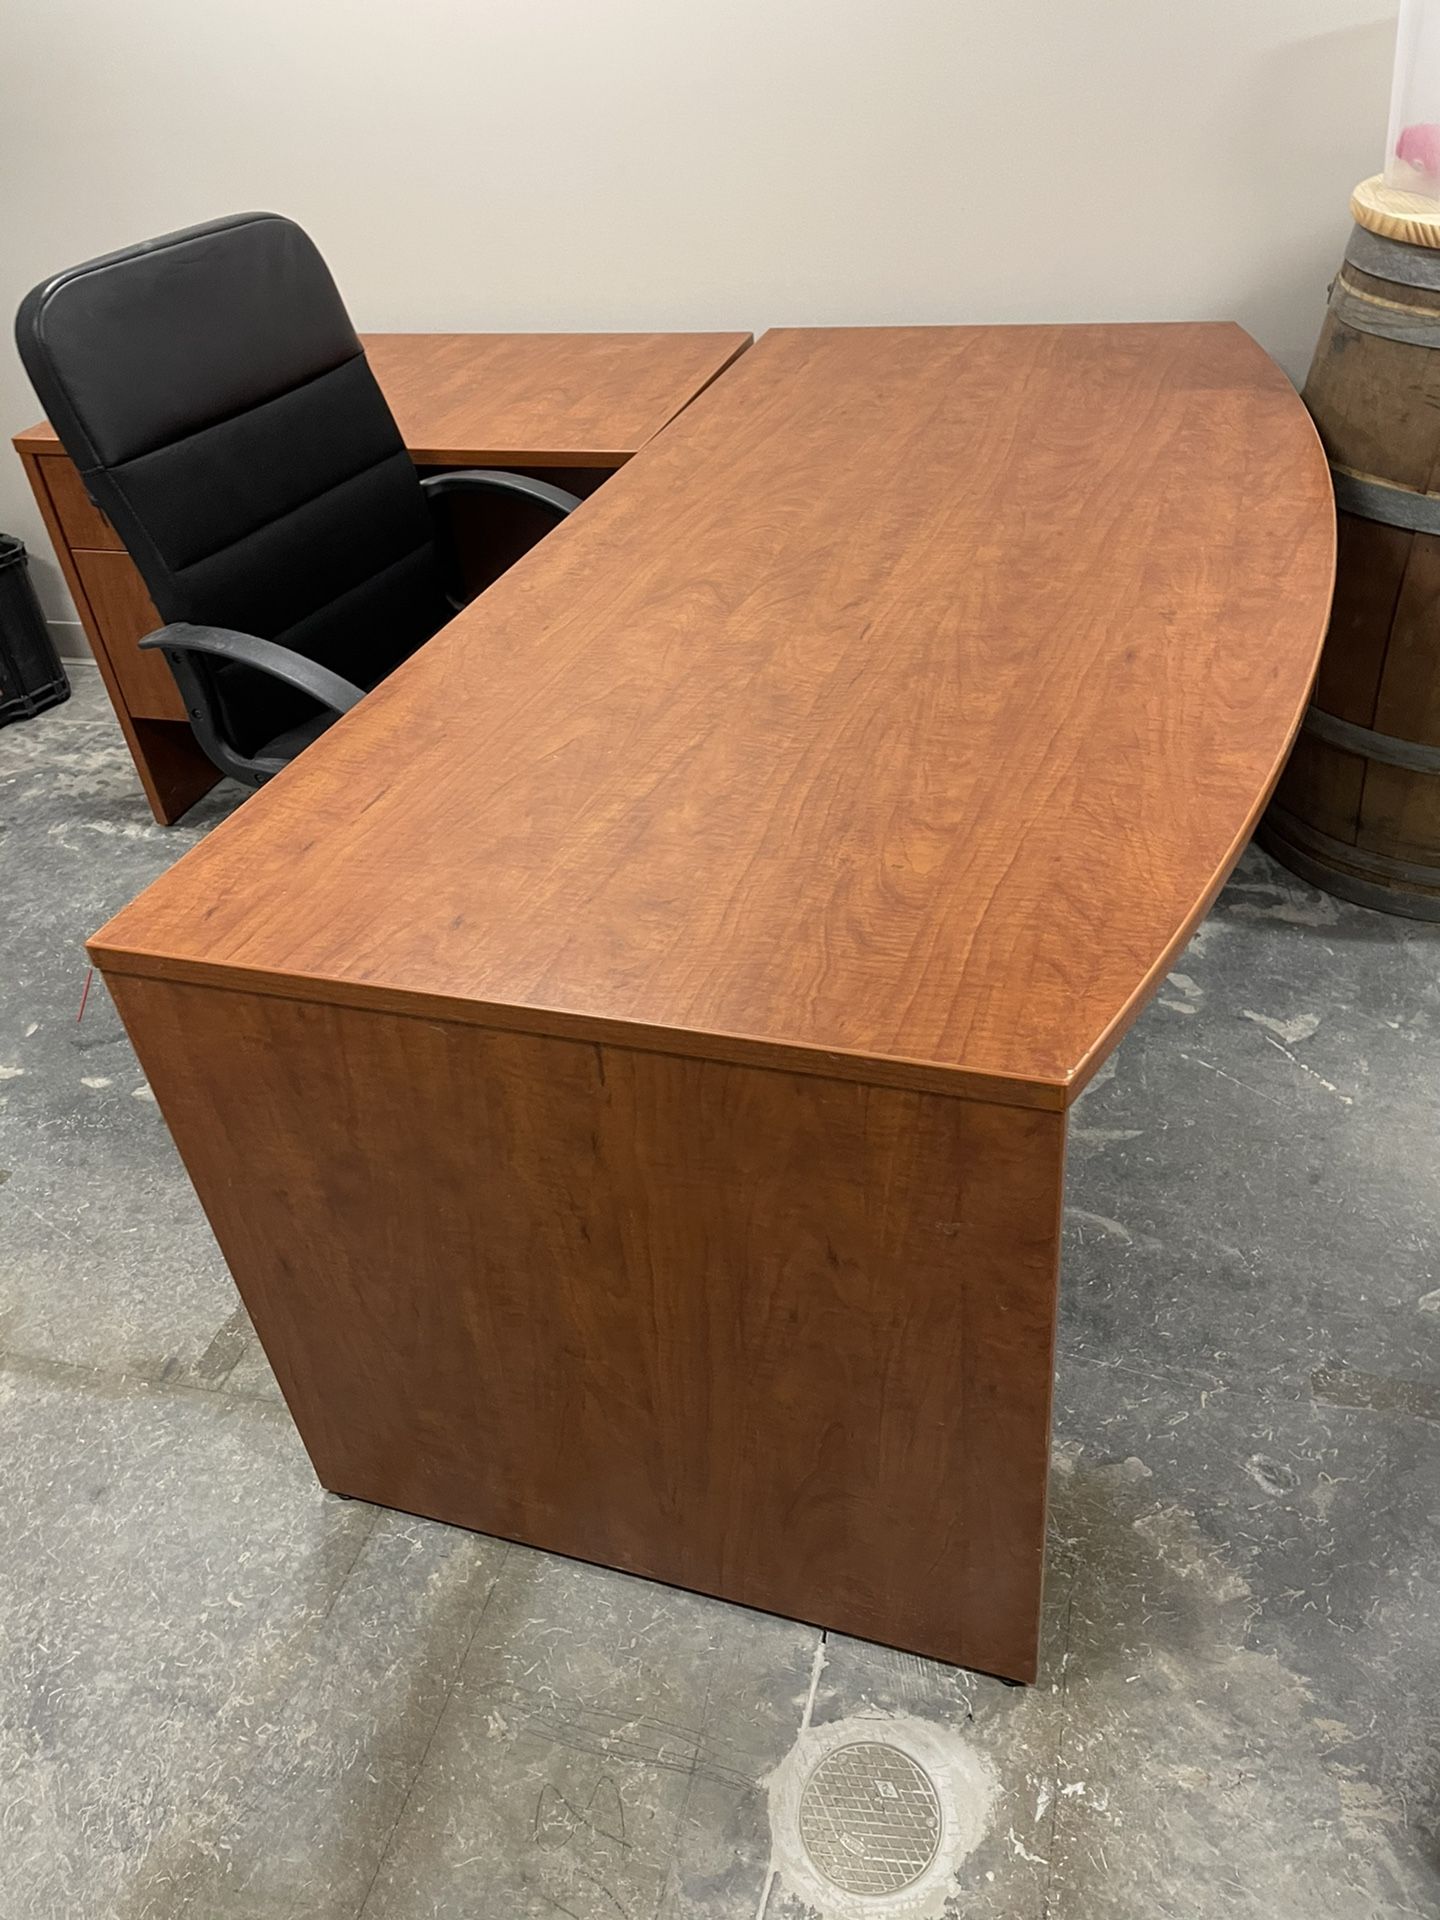 Office desk and accessories for sale. $375